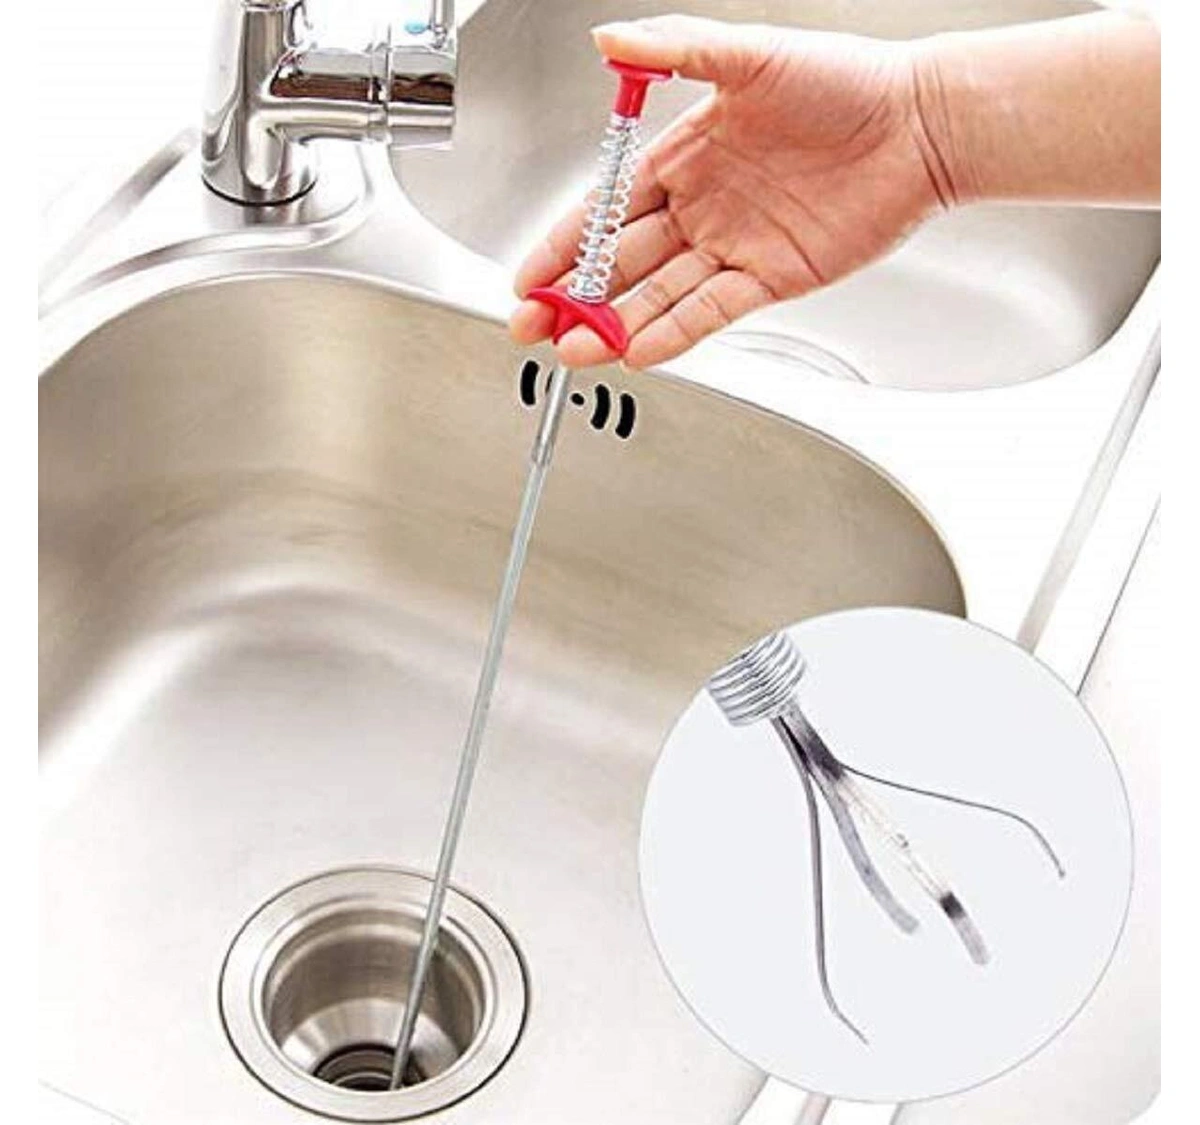 Slow Drain Cleaner And Clog Remover For Sink, Dredge, Pipeline